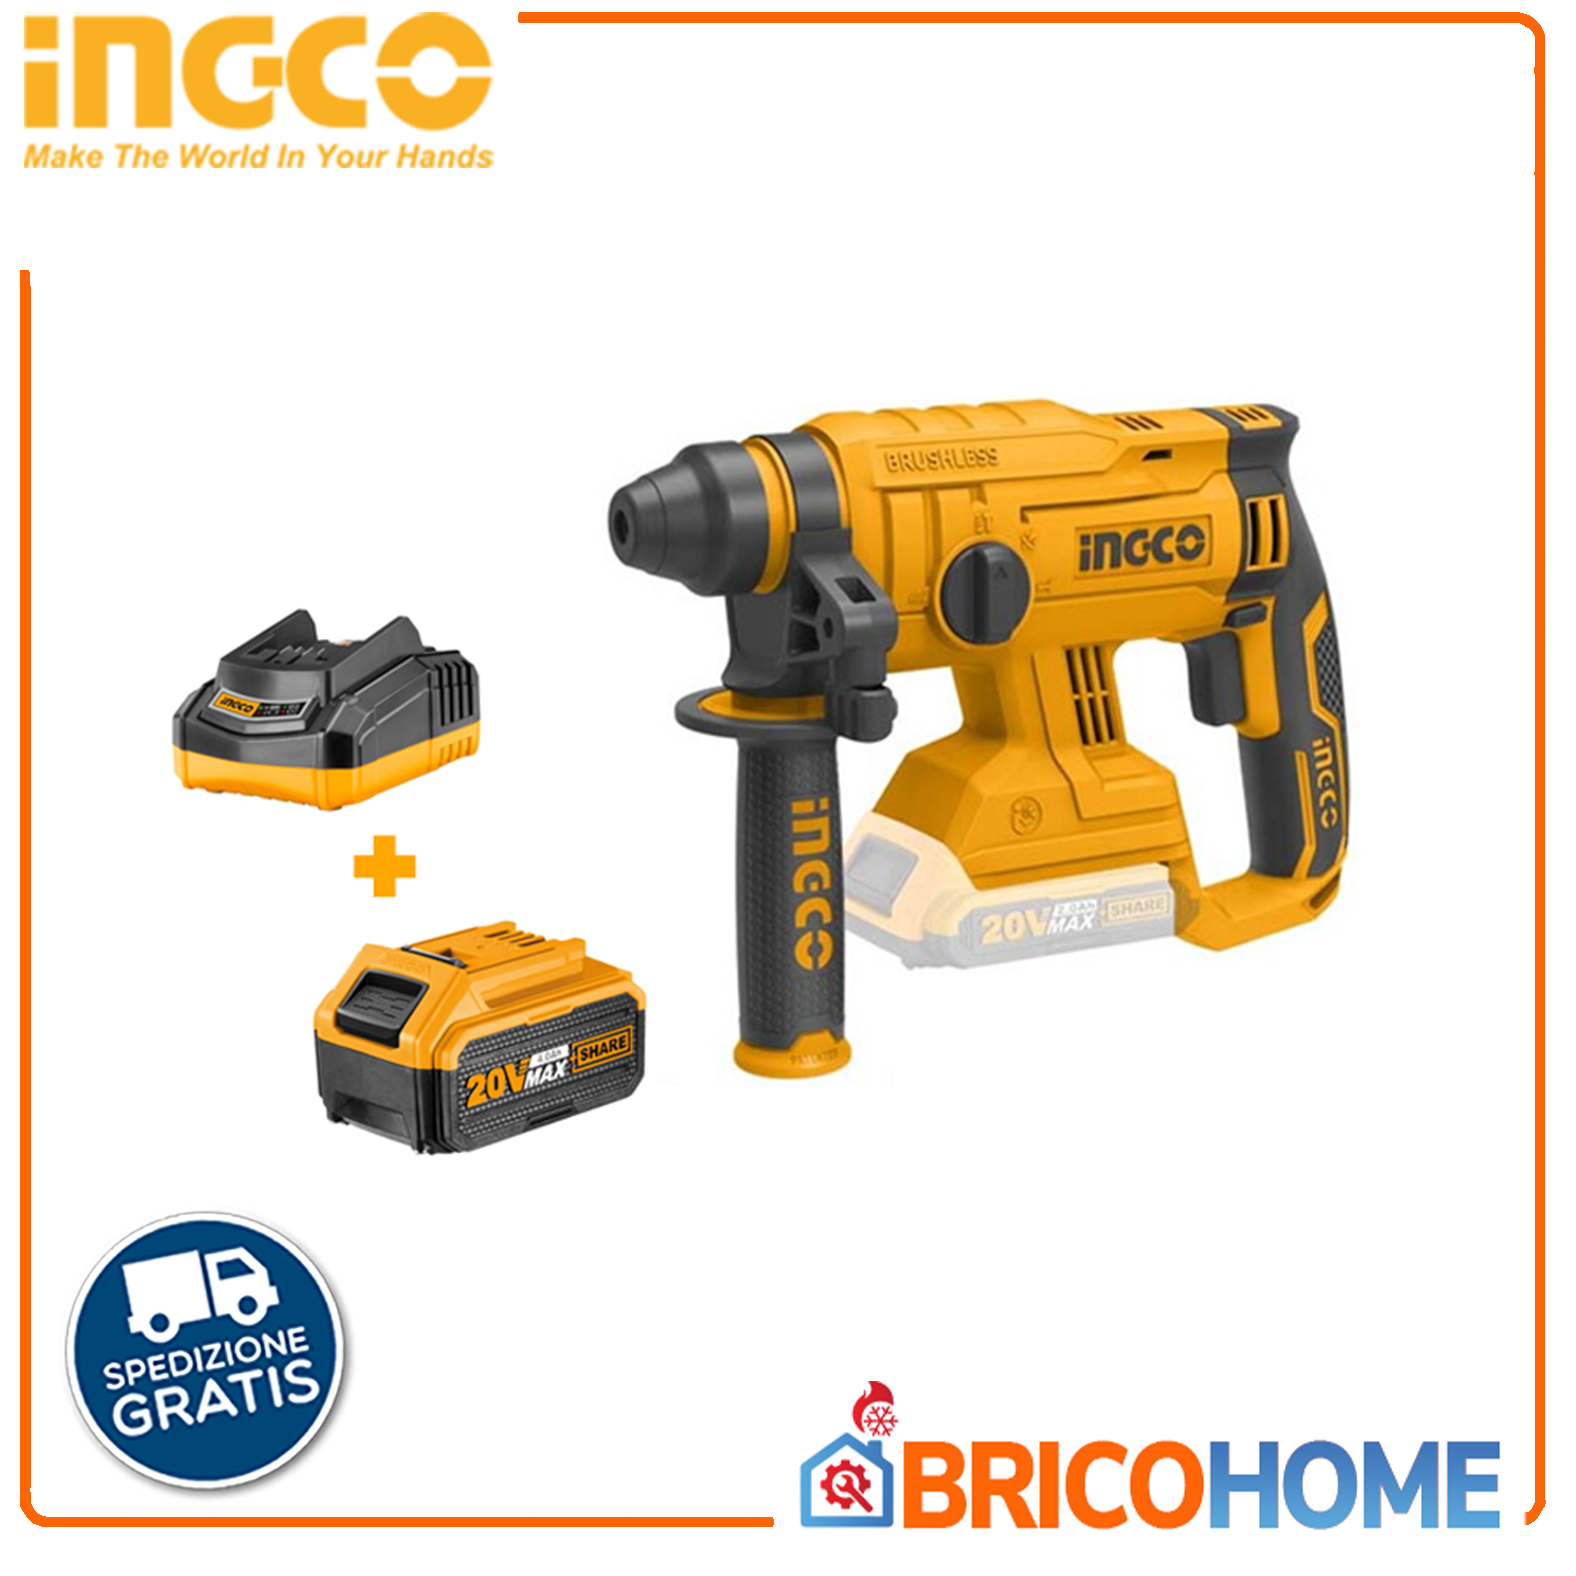 INGCO KIT Cordless demolition hammer + battery charger + 4Ah battery